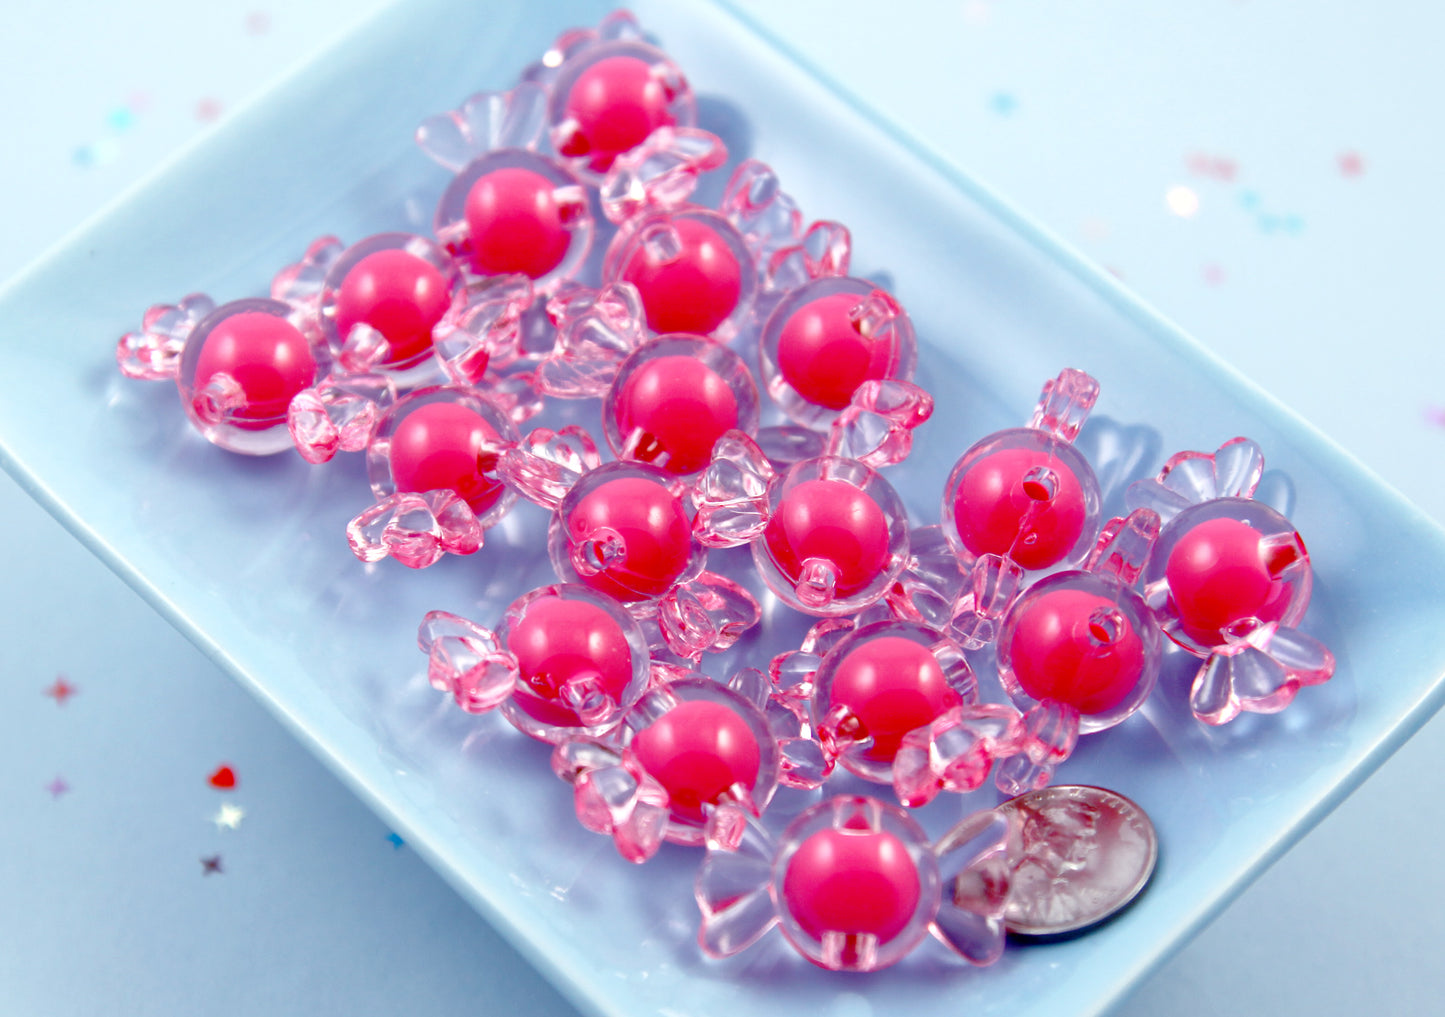 Candy Beads - Bright Pink - 30mm Big Pastel Candies Wrapped Candy Shape Acrylic or Resin Beads - 20 pc set